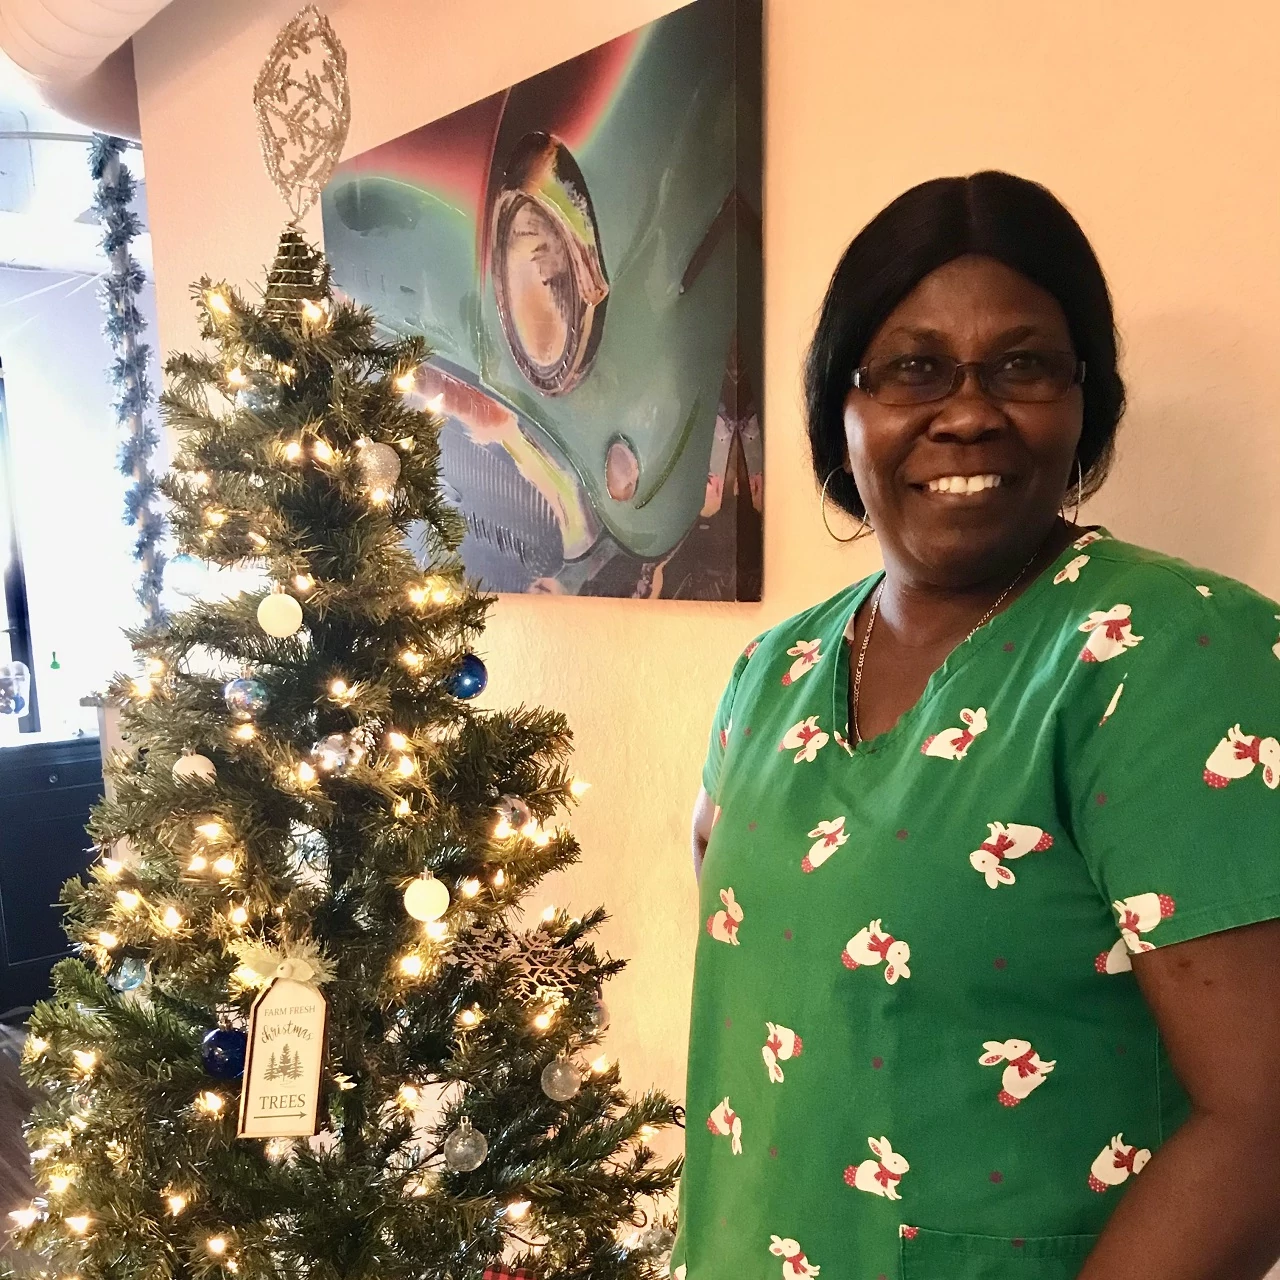 A great smile from a Senior Helpers' caregiver signaled a festive mood at the December 2021 holiday gathering.